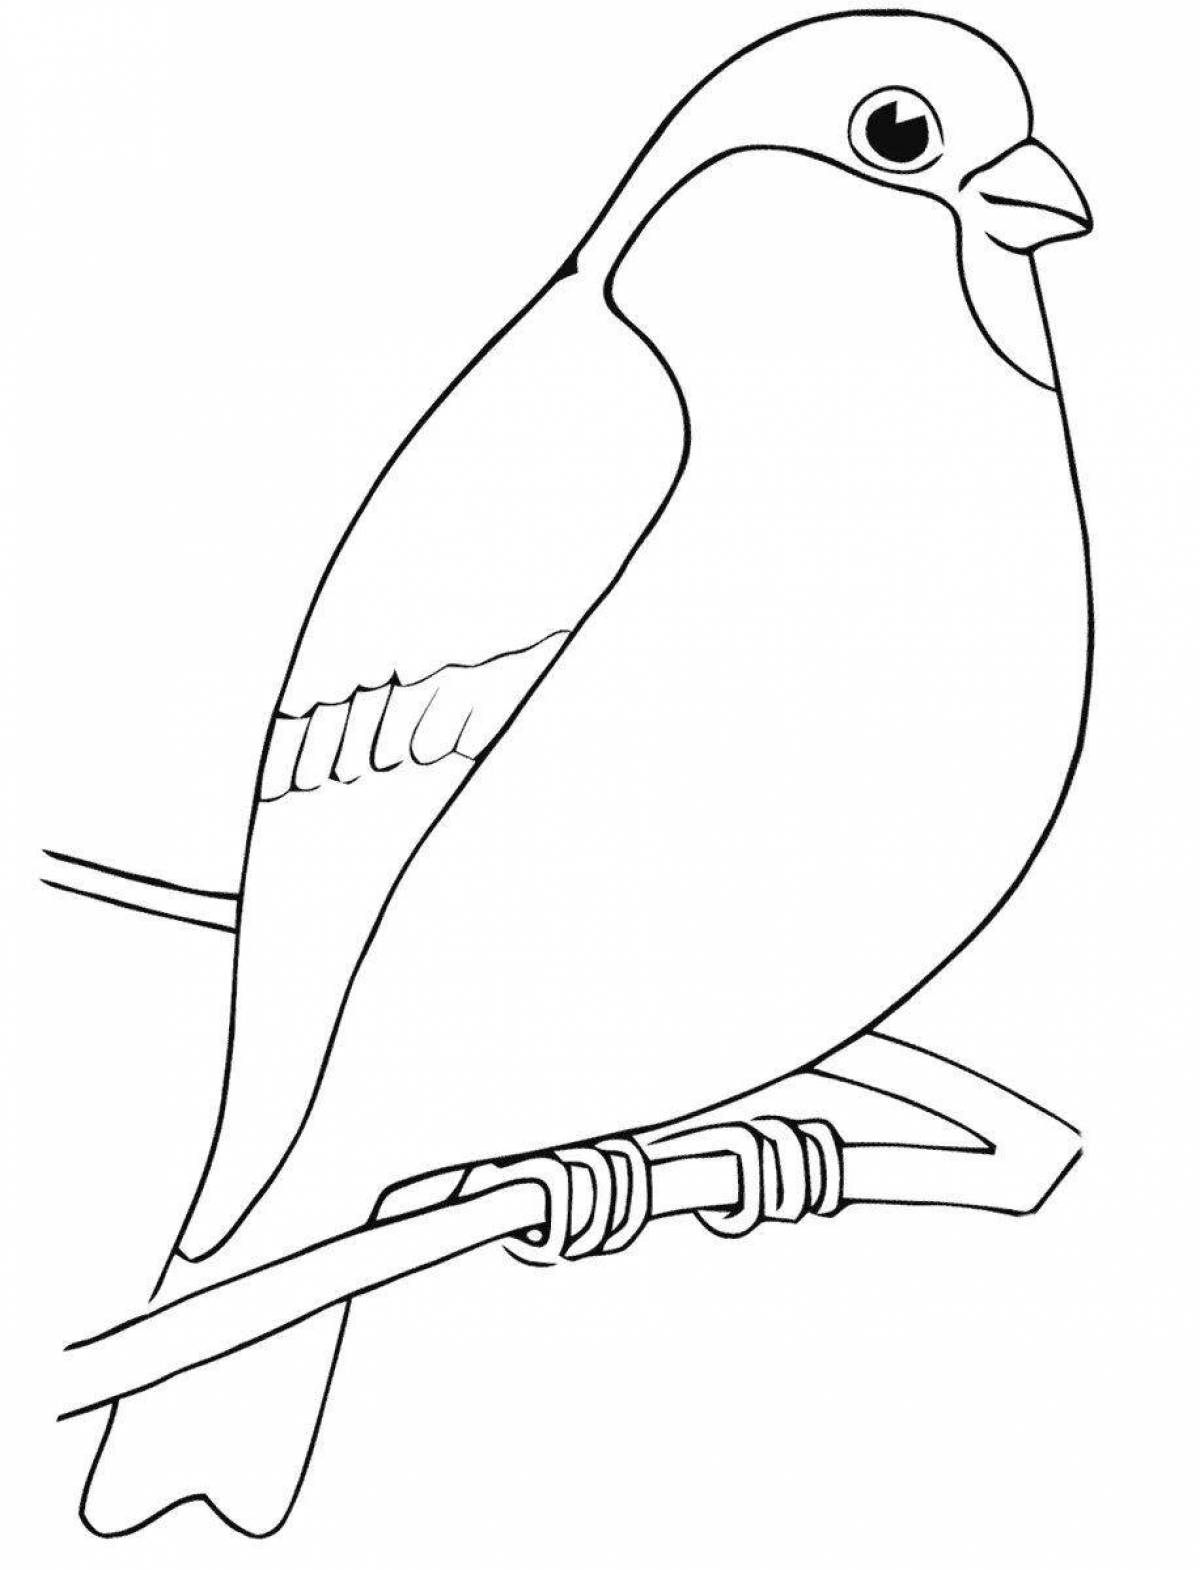 Fairy bullfinch coloring page